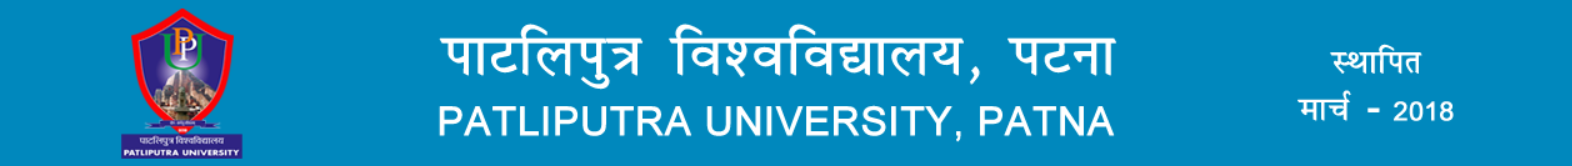 Patliputra University Exam Form Fill Up 2023: Sem-3rd and 4th session (18-2020) Back/Promoted exam form fill up, last date 13/02/23, fill your form now